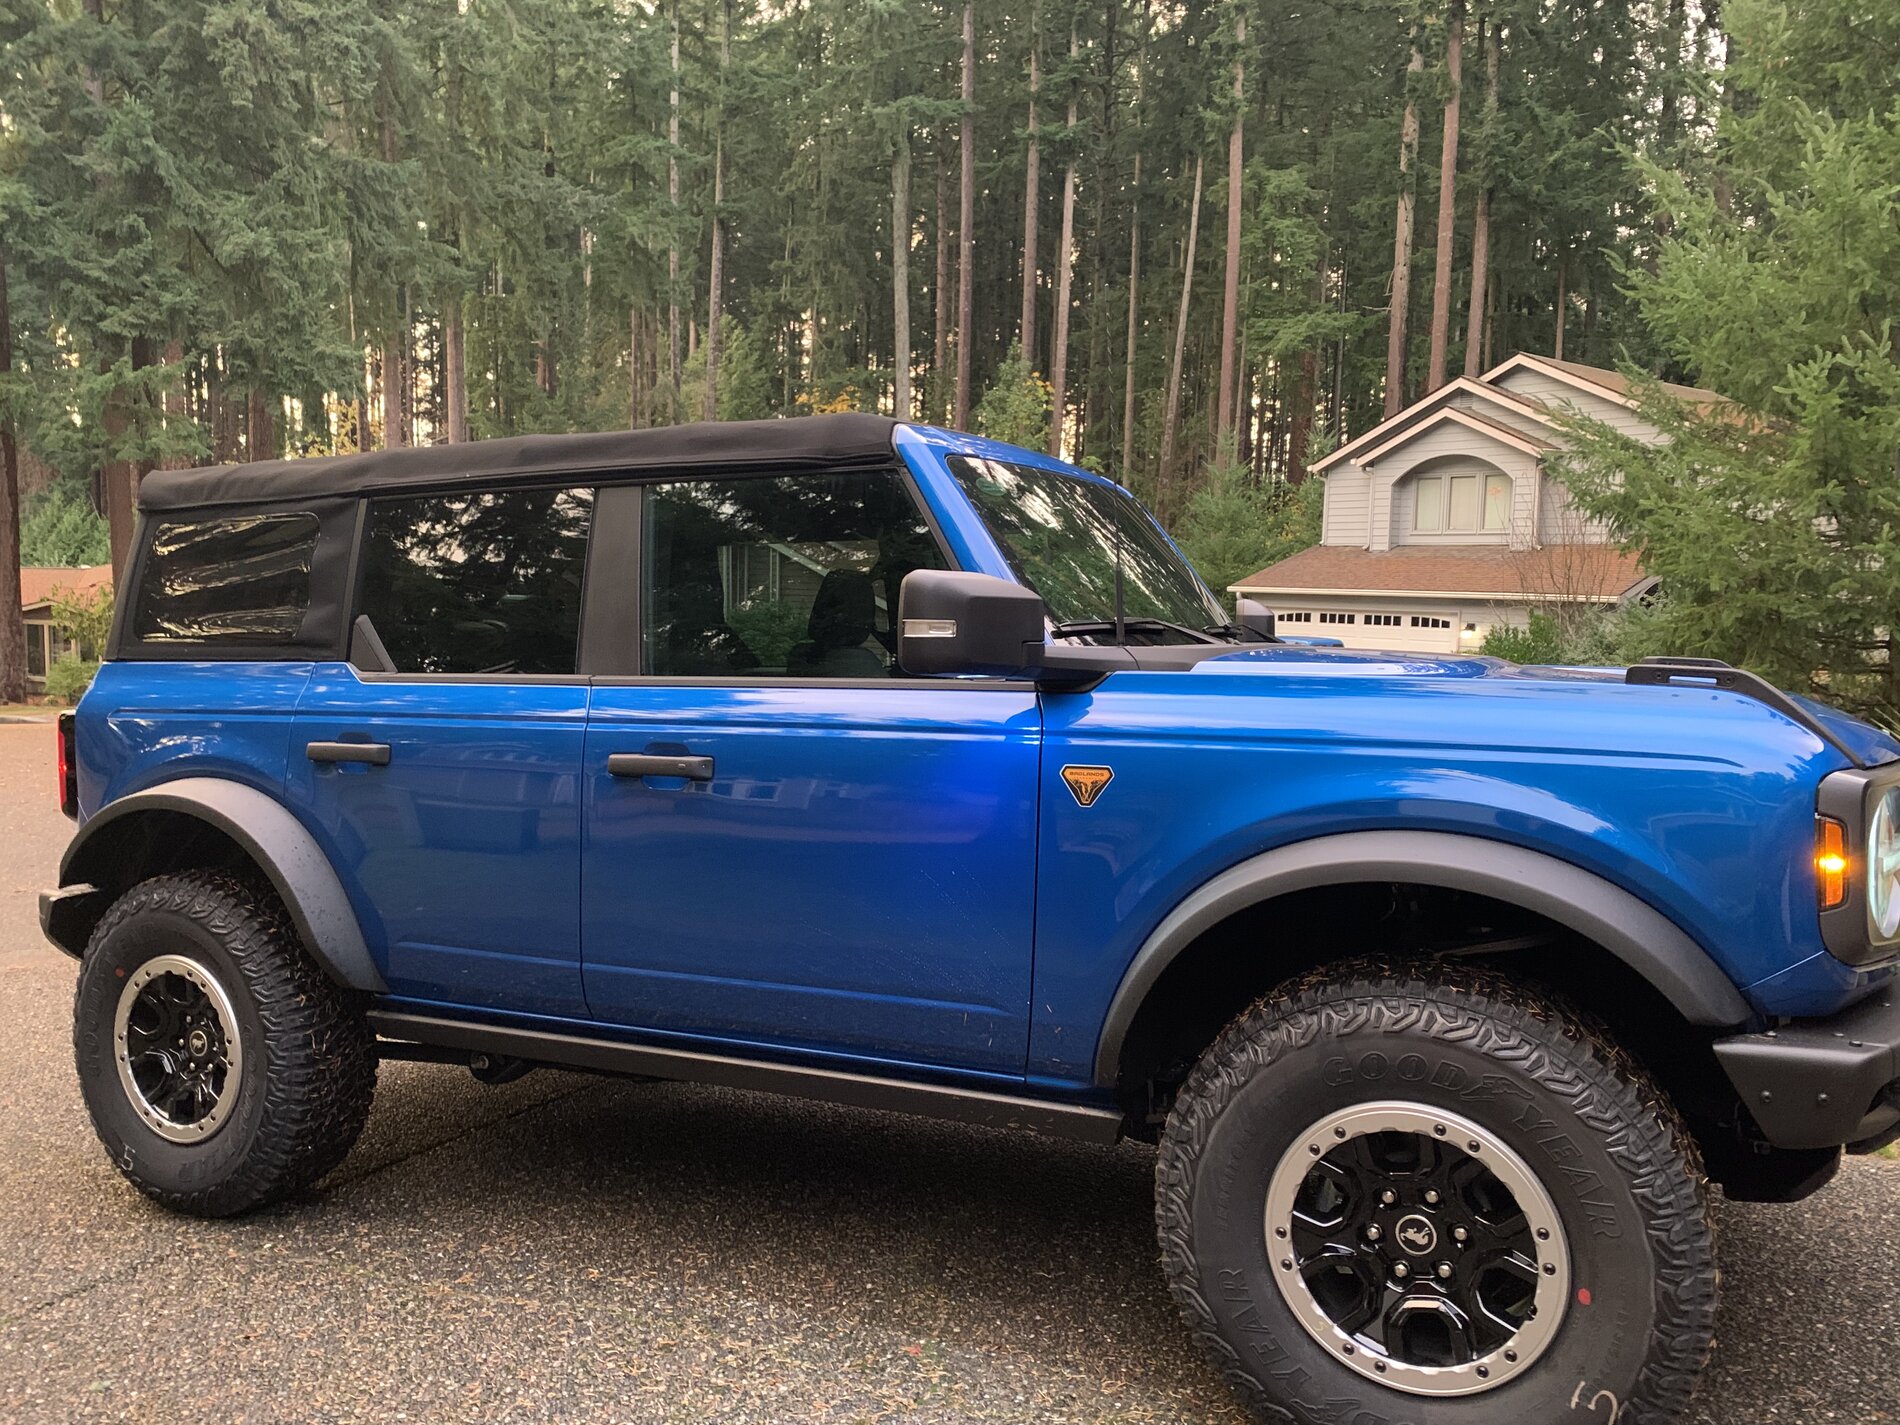 Ford Bronco The PNW Deliveries Received Thread 90F8355A-741A-49AA-AB03-60EE47D59409